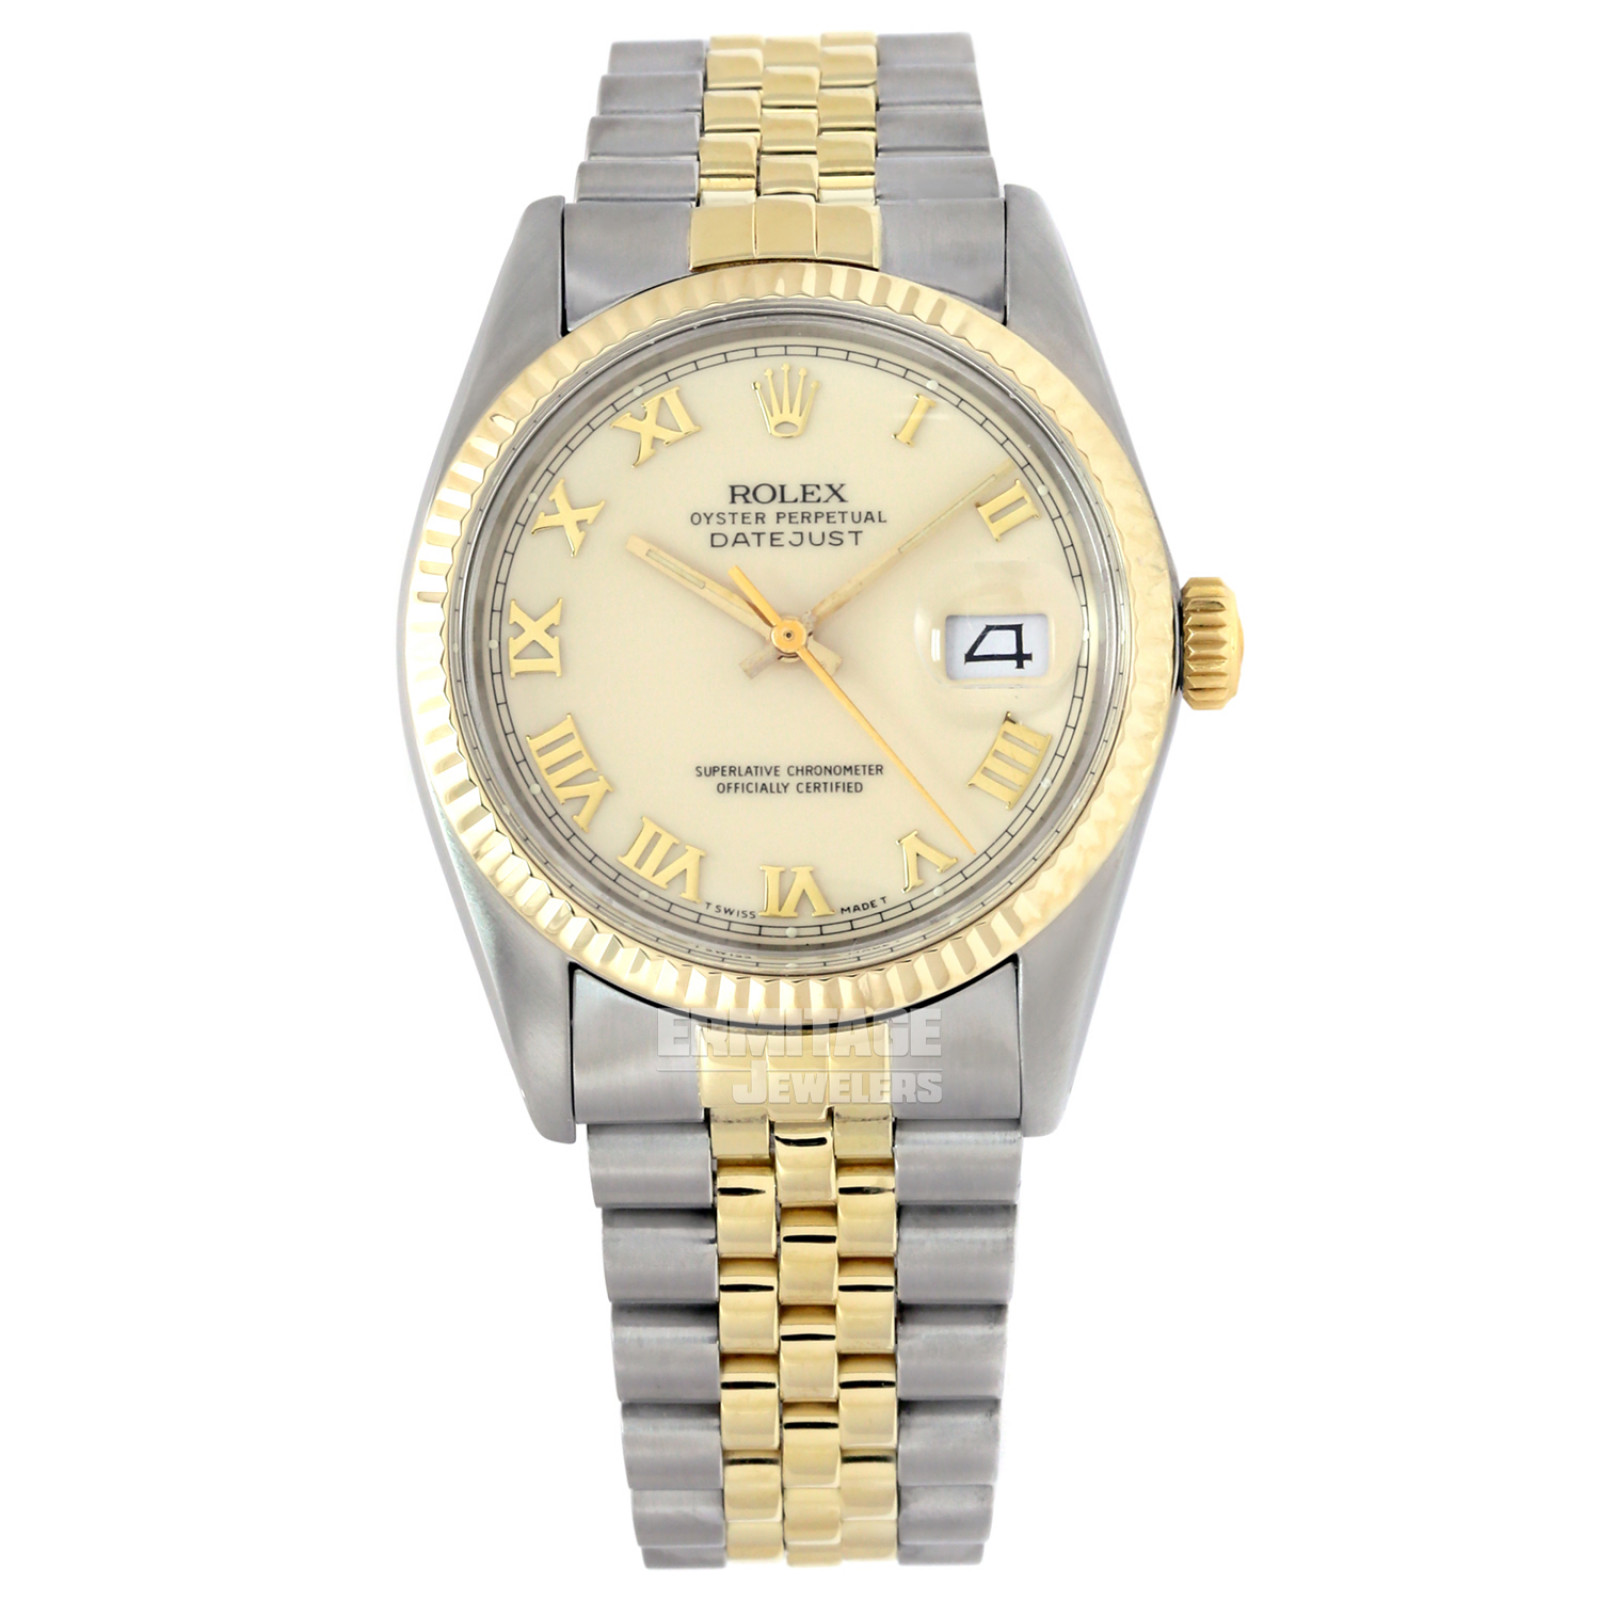 Rolex Datejust 16013 with Ivory Dial